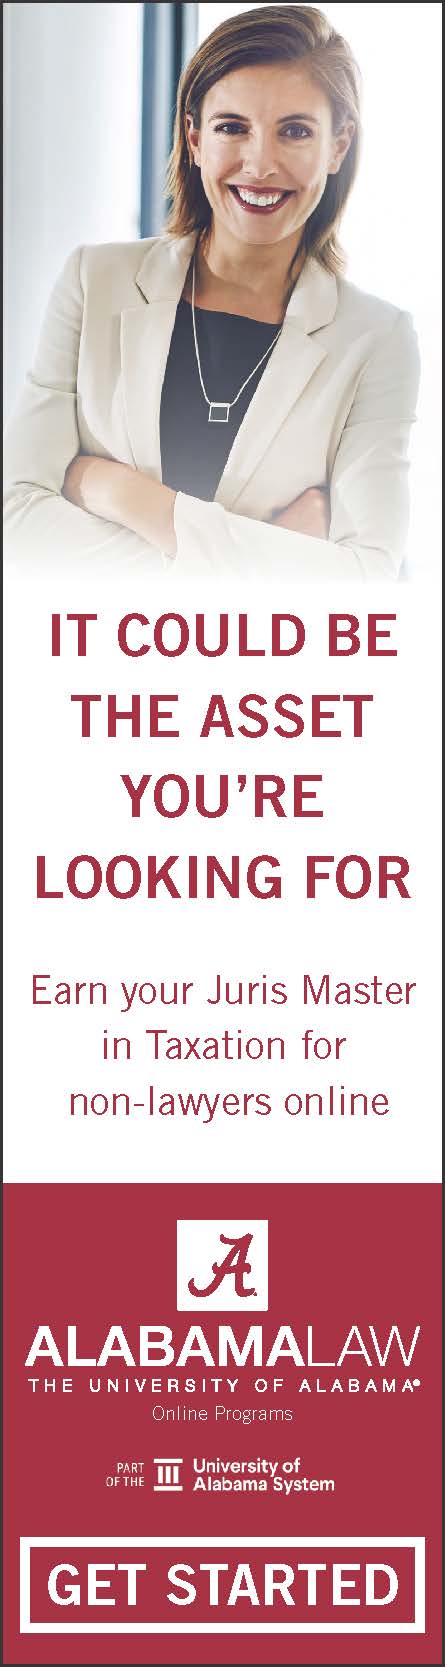 Juris Master in Taxation for non-lawyers | Alabama Law